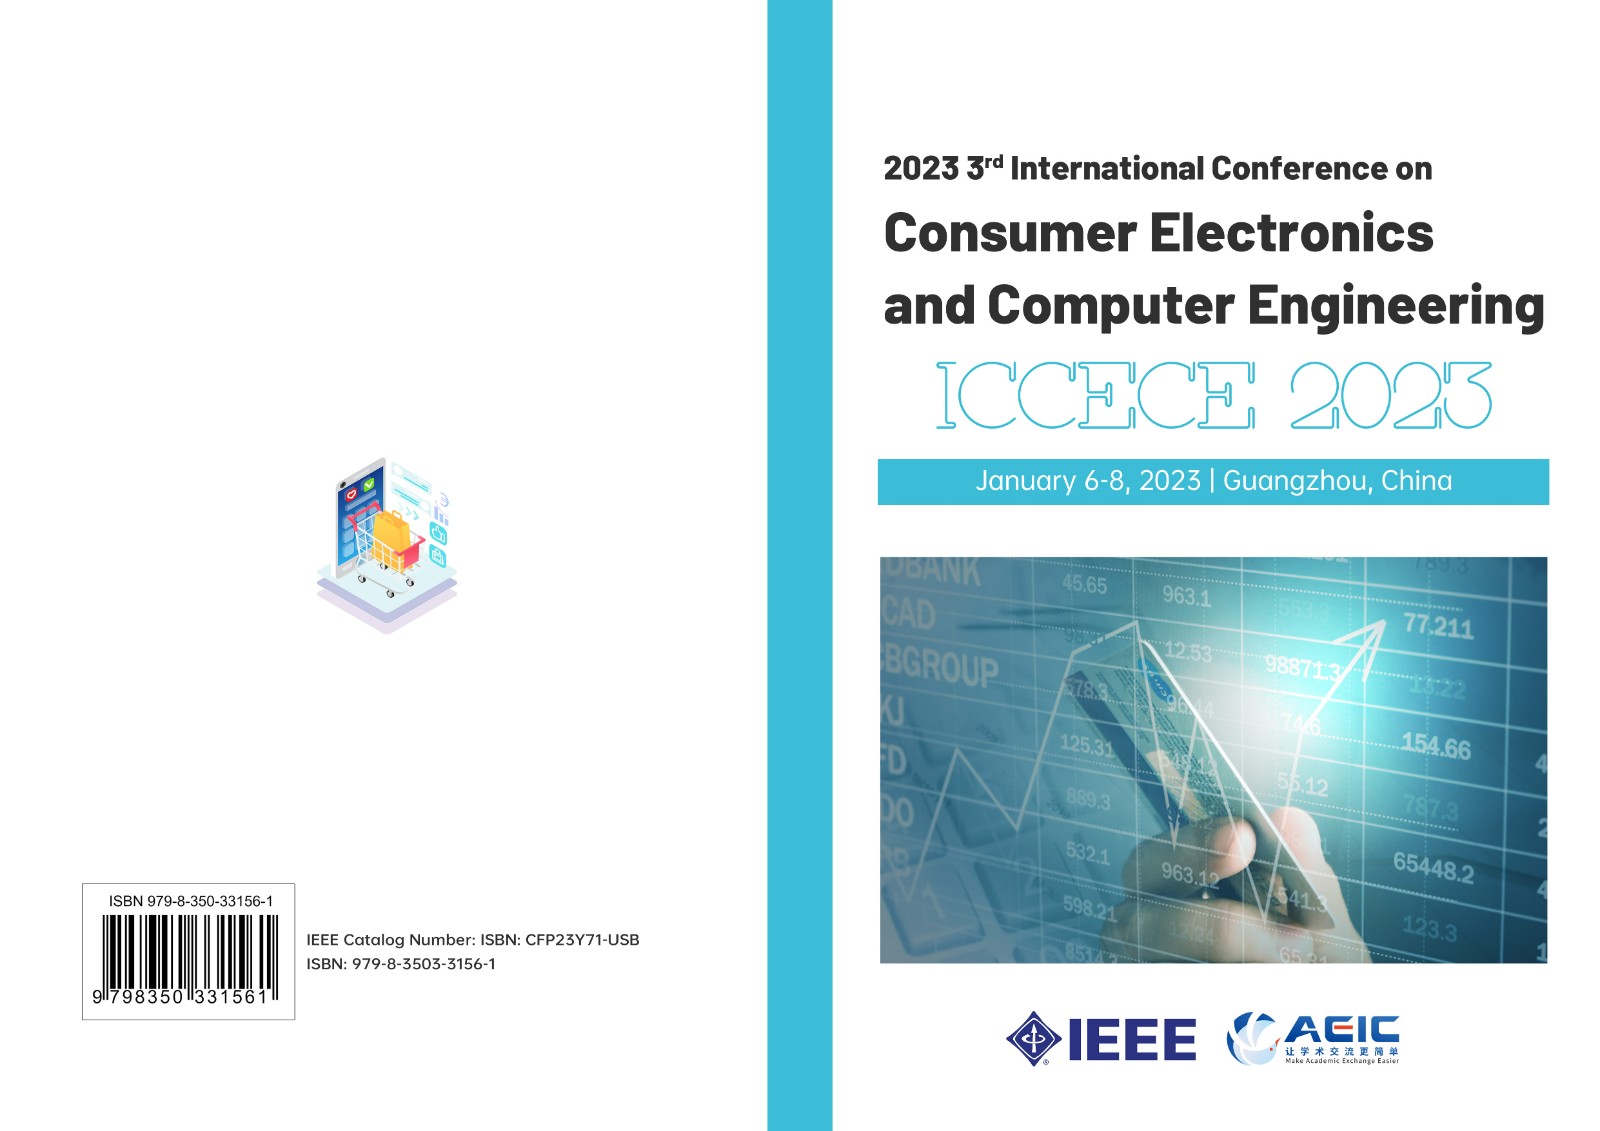 Cover-ICCECE 2023.jpg